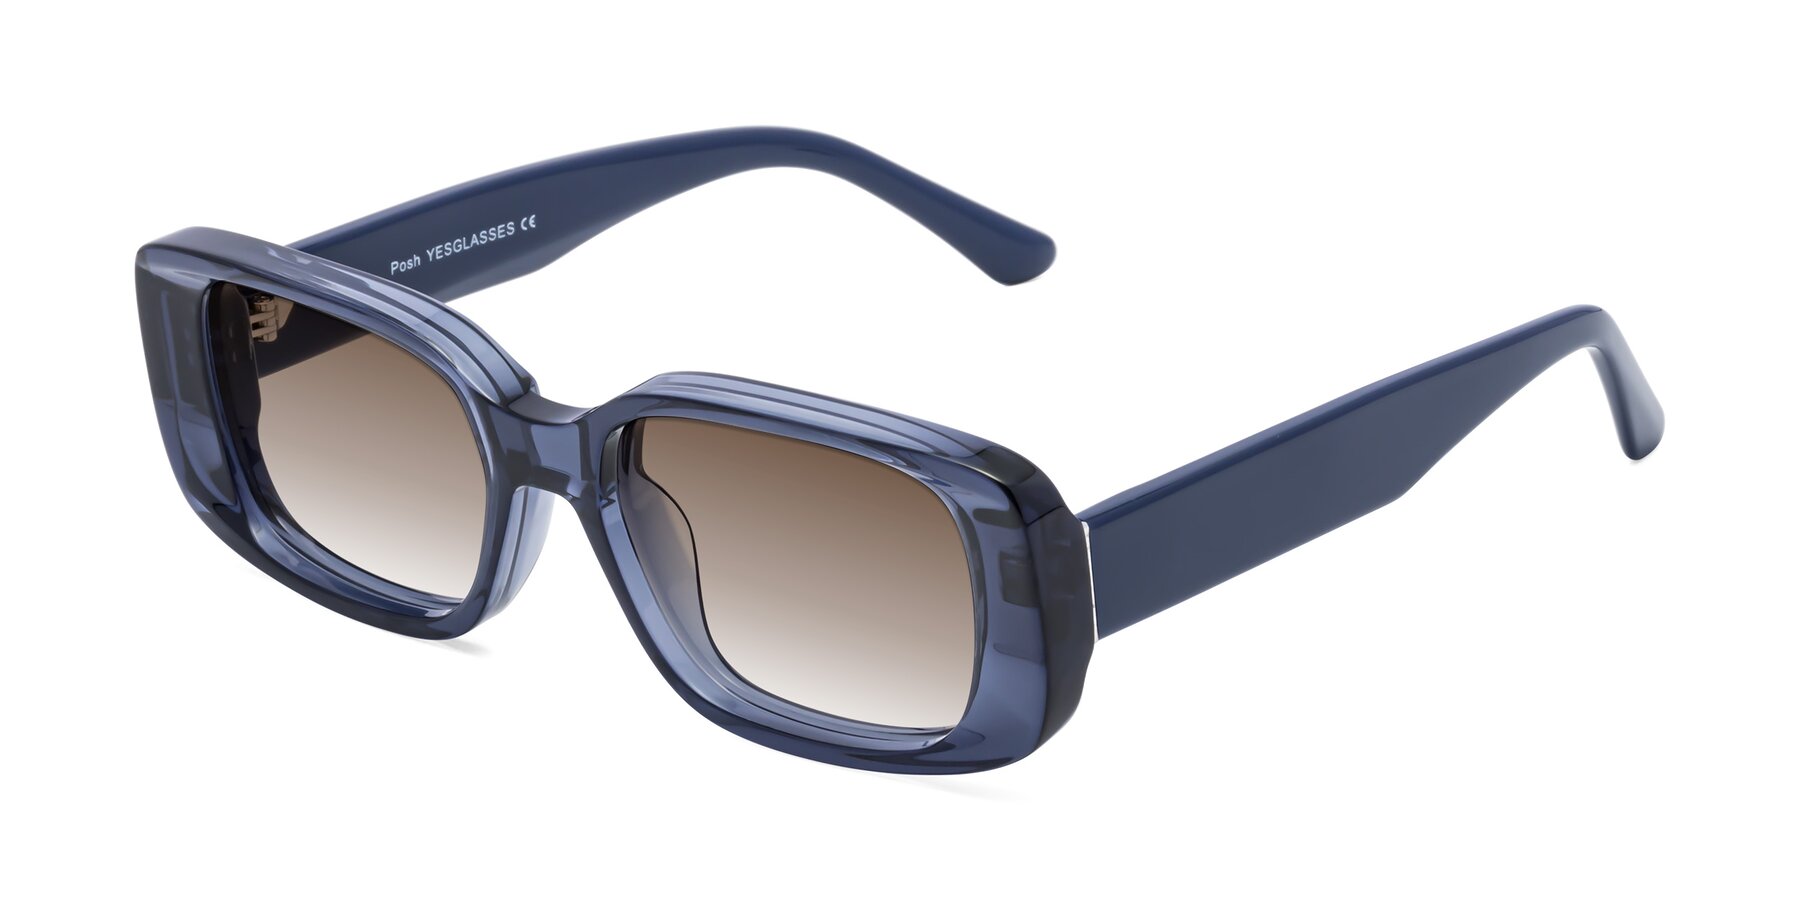 Angle of Posh in Translucent Blue with Brown Gradient Lenses